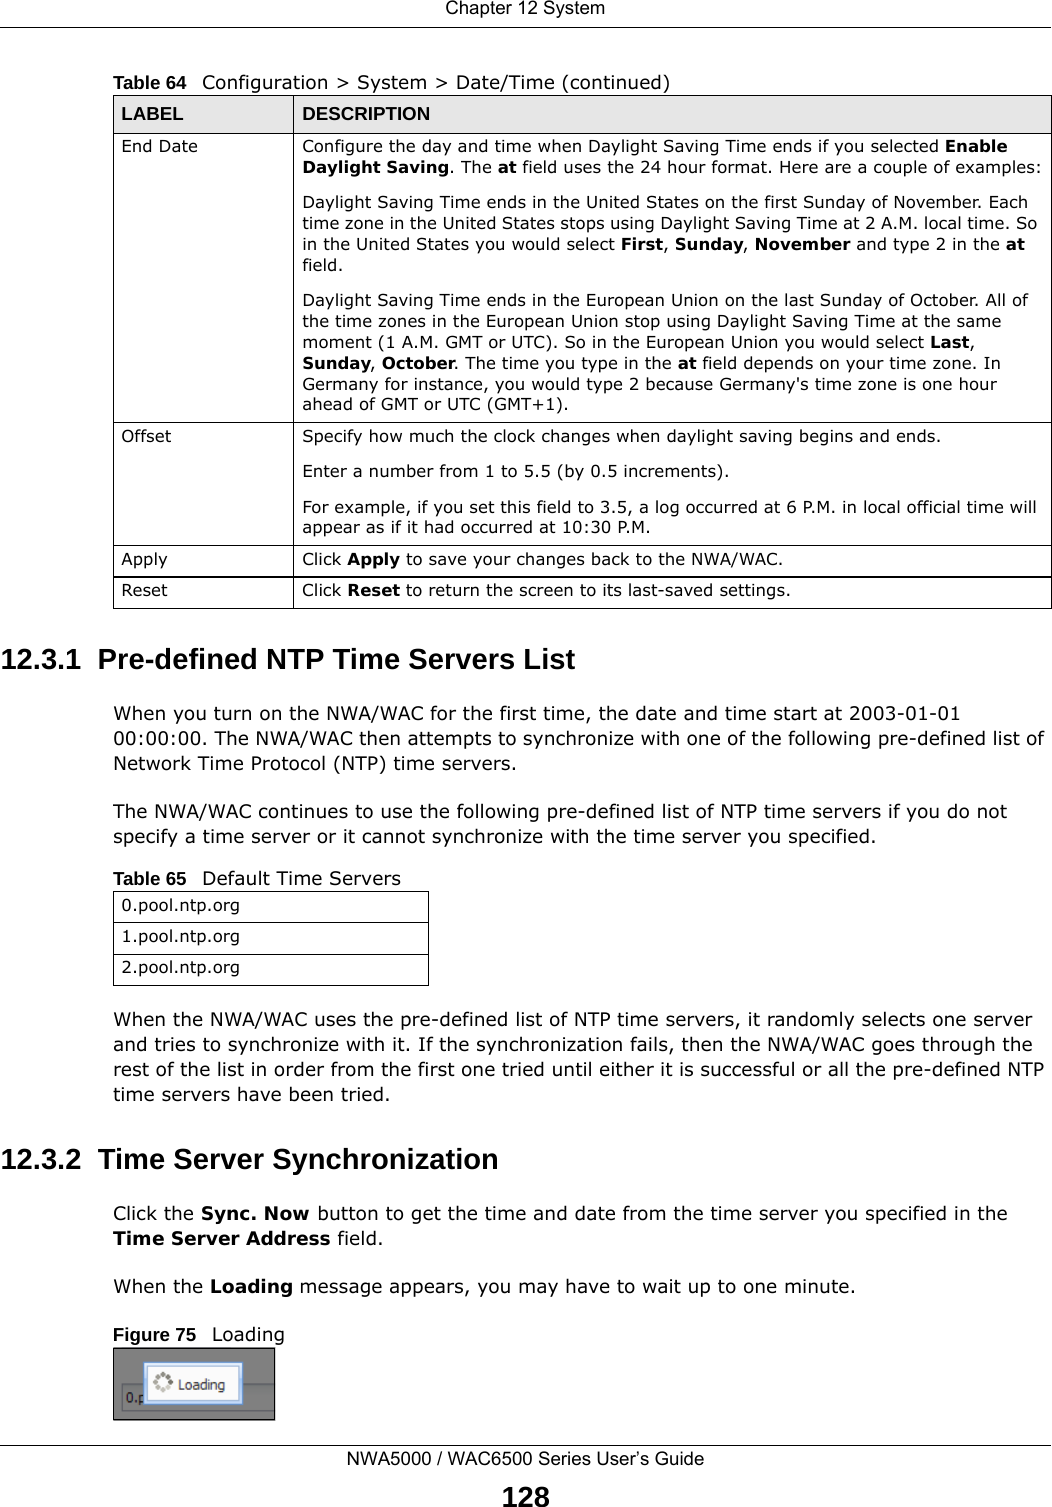 Chapter 12 SystemNWA5000 / WAC6500 Series User’s Guide12812.3.1  Pre-defined NTP Time Servers ListWhen you turn on the NWA/WAC for the first time, the date and time start at 2003-01-01 00:00:00. The NWA/WAC then attempts to synchronize with one of the following pre-defined list of Network Time Protocol (NTP) time servers.The NWA/WAC continues to use the following pre-defined list of NTP time servers if you do not specify a time server or it cannot synchronize with the time server you specified. When the NWA/WAC uses the pre-defined list of NTP time servers, it randomly selects one server and tries to synchronize with it. If the synchronization fails, then the NWA/WAC goes through the rest of the list in order from the first one tried until either it is successful or all the pre-defined NTP time servers have been tried.12.3.2  Time Server SynchronizationClick the Sync. Now button to get the time and date from the time server you specified in the Time Server Address field.When the Loading message appears, you may have to wait up to one minute.Figure 75   LoadingEnd Date Configure the day and time when Daylight Saving Time ends if you selected Enable Daylight Saving. The at field uses the 24 hour format. Here are a couple of examples:Daylight Saving Time ends in the United States on the first Sunday of November. Each time zone in the United States stops using Daylight Saving Time at 2 A.M. local time. So in the United States you would select First, Sunday, November and type 2 in the at field.Daylight Saving Time ends in the European Union on the last Sunday of October. All of the time zones in the European Union stop using Daylight Saving Time at the same moment (1 A.M. GMT or UTC). So in the European Union you would select Last, Sunday, October. The time you type in the at field depends on your time zone. In Germany for instance, you would type 2 because Germany&apos;s time zone is one hour ahead of GMT or UTC (GMT+1). Offset Specify how much the clock changes when daylight saving begins and ends. Enter a number from 1 to 5.5 (by 0.5 increments). For example, if you set this field to 3.5, a log occurred at 6 P.M. in local official time will appear as if it had occurred at 10:30 P.M.Apply Click Apply to save your changes back to the NWA/WAC.Reset Click Reset to return the screen to its last-saved settings. Table 64   Configuration &gt; System &gt; Date/Time (continued)LABEL DESCRIPTIONTable 65   Default Time Servers0.pool.ntp.org1.pool.ntp.org2.pool.ntp.org